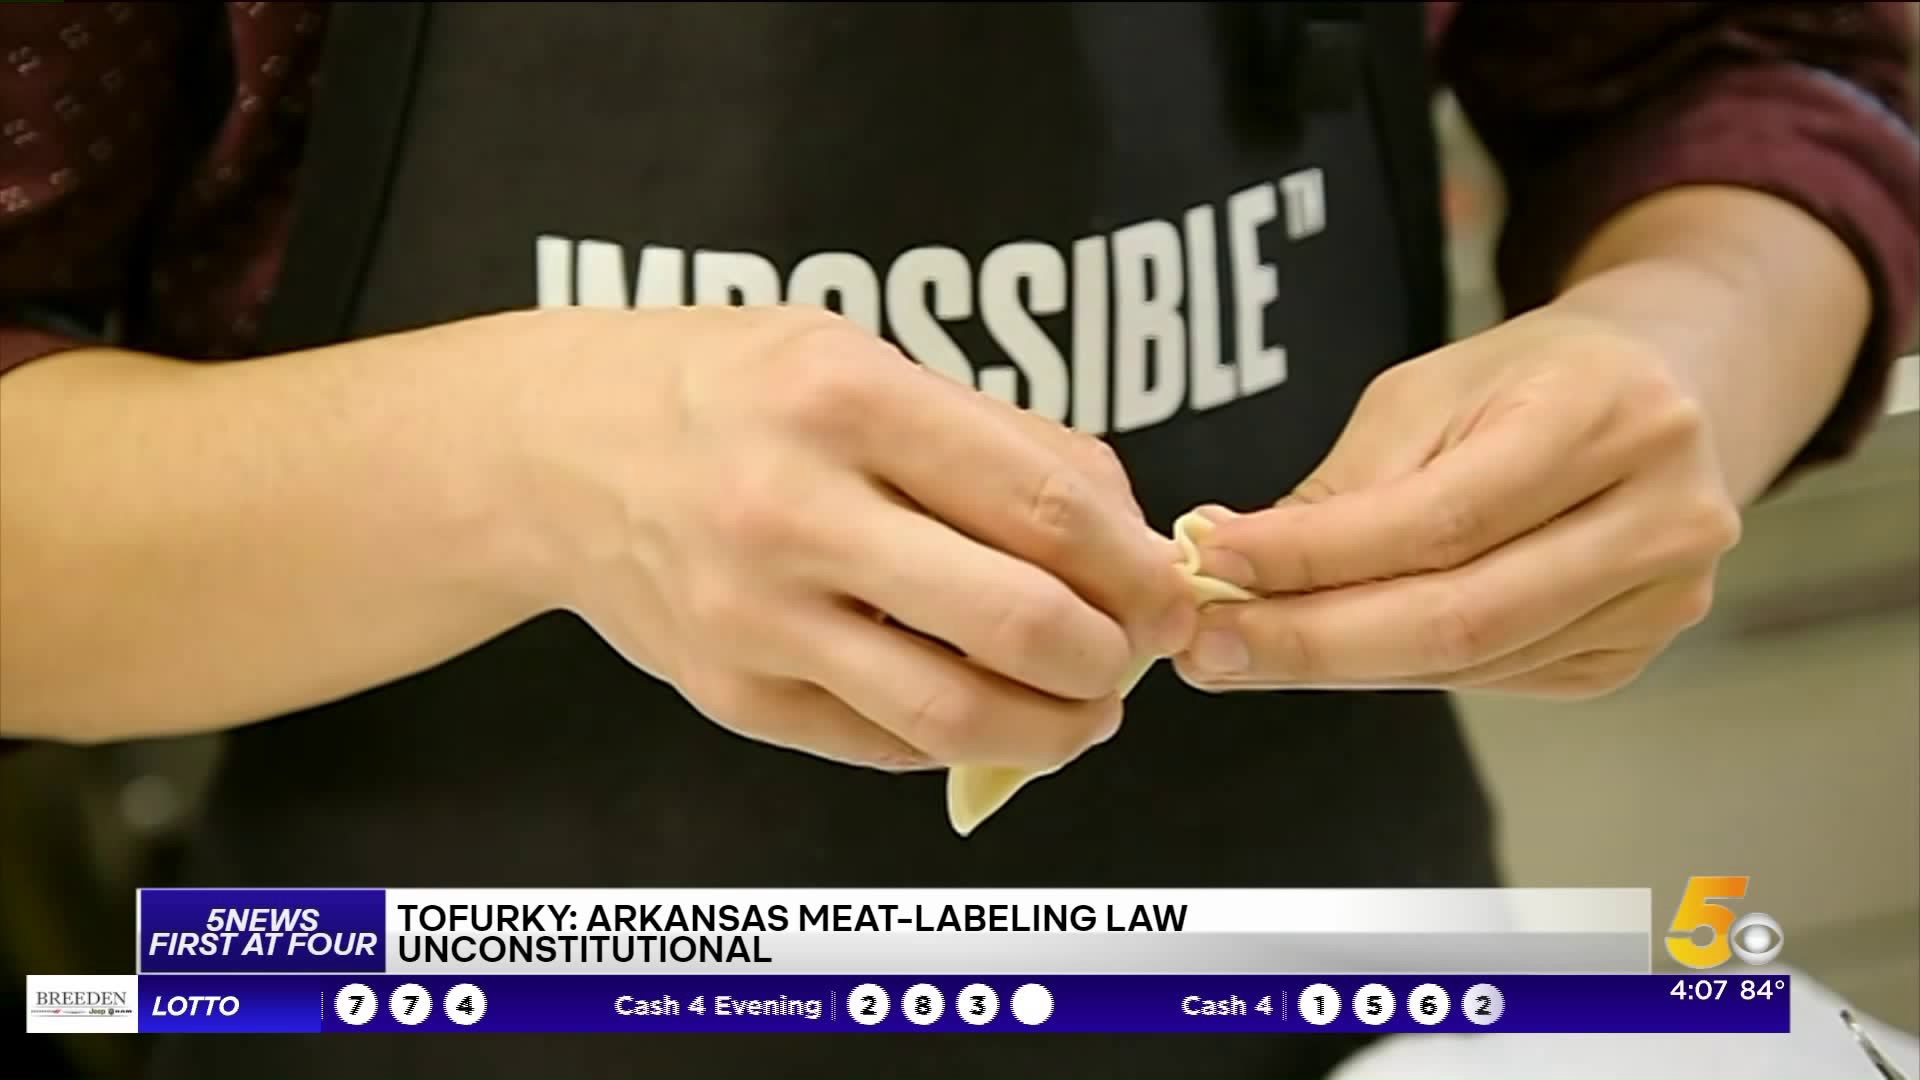 Tofurky: Arkansas Meat-Labeling Law Unconstitutional